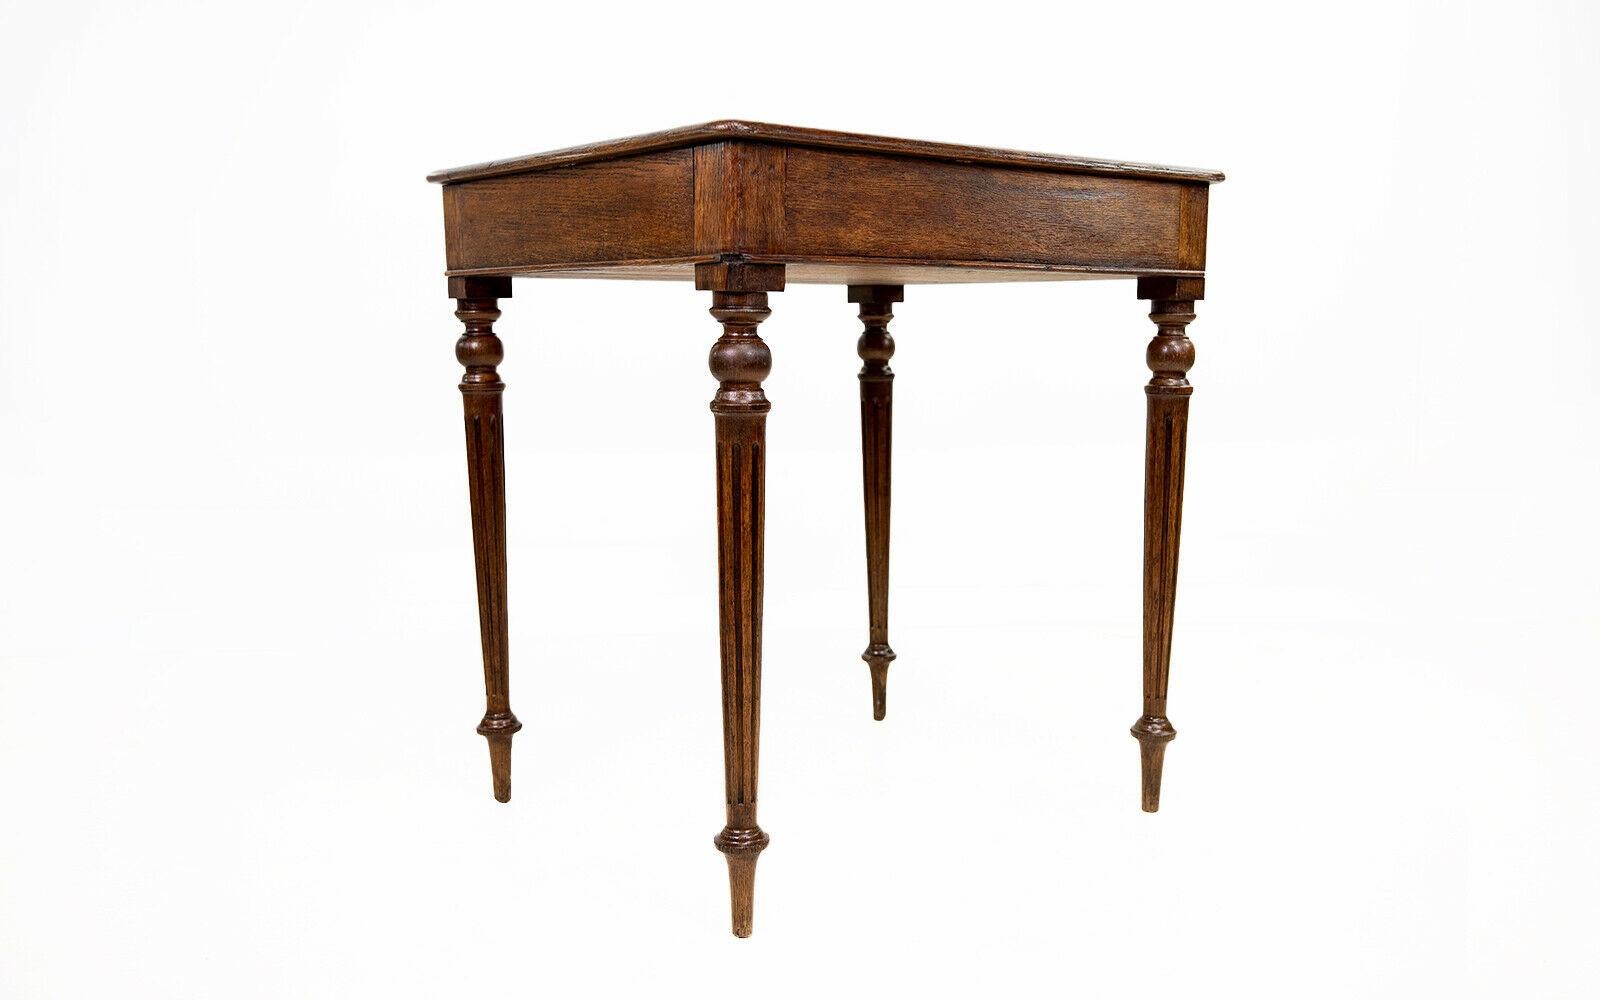 Antique Architects desk

A 19th century English architect's drawing table desk in oak.

The hinged top adjusts to various angles, there are brass fittings, and the lid opens to reveal compartments for storage. The top is raised on detailed